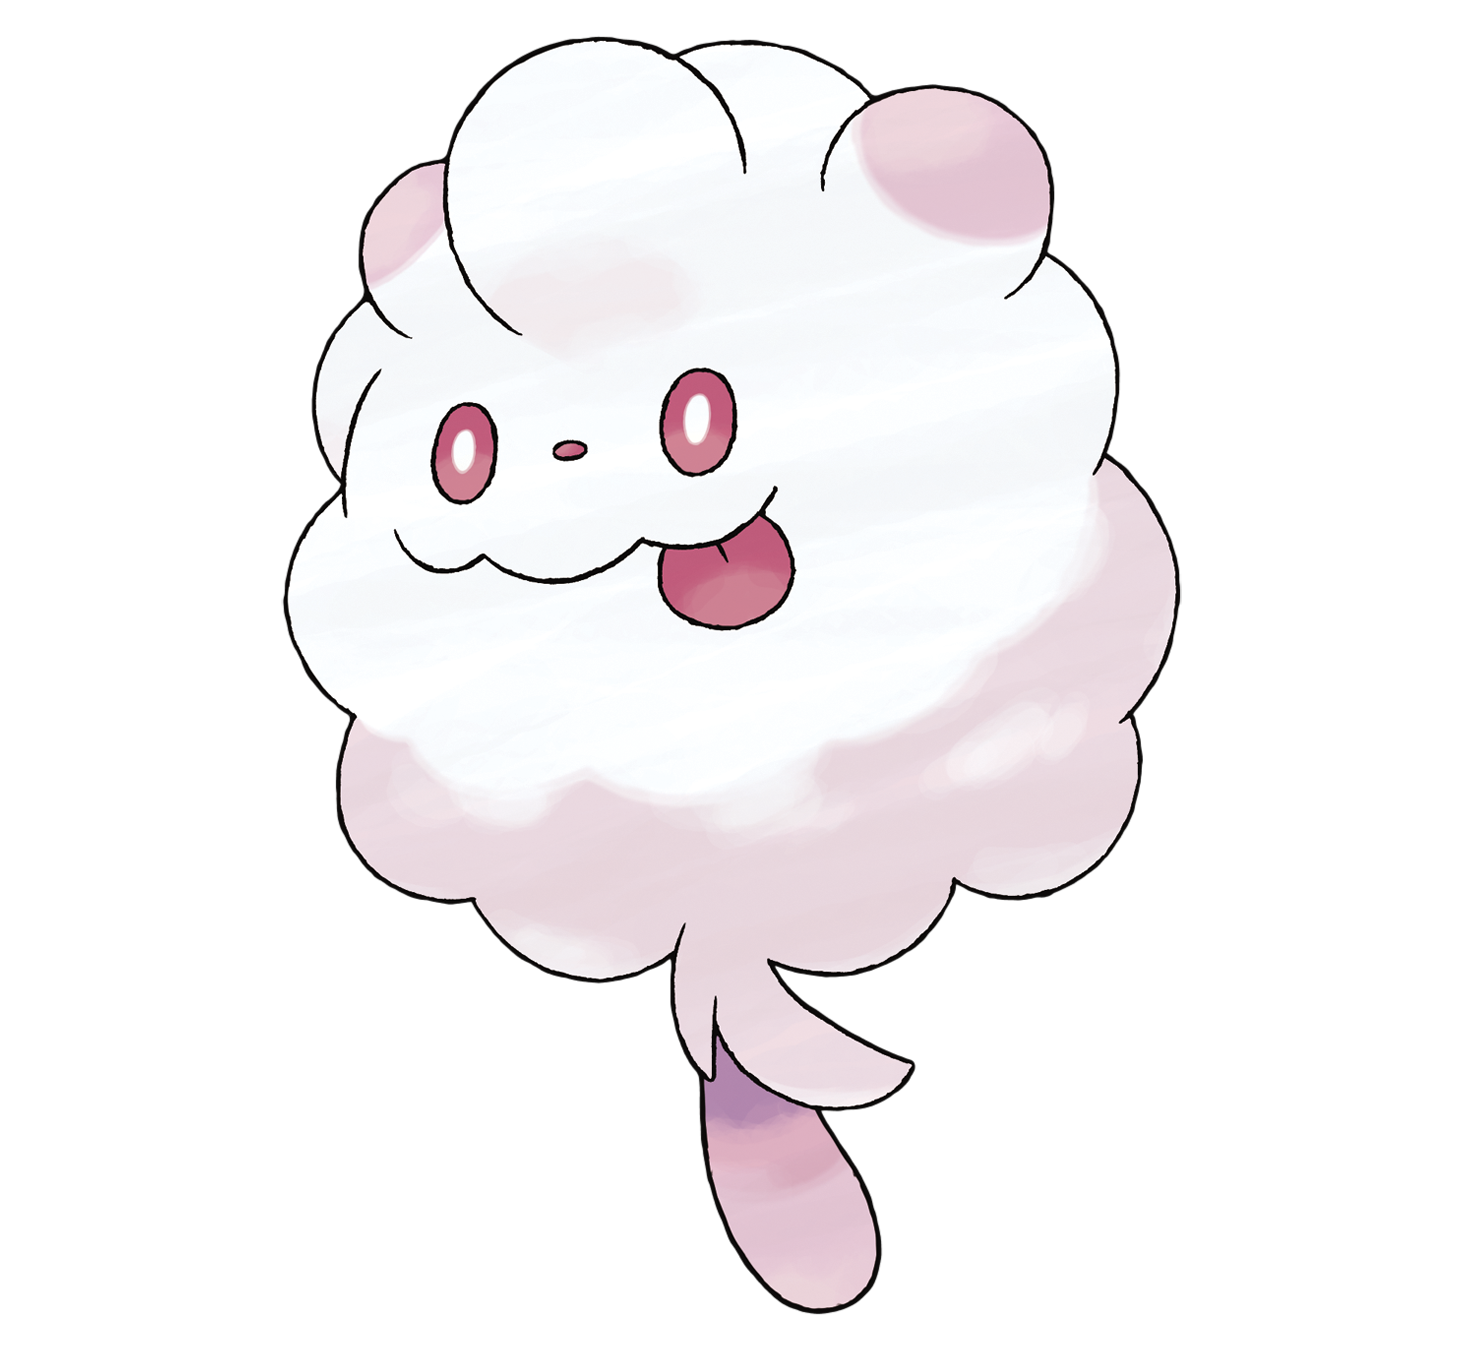 http://img4.wikia.nocookie.net/__cb20130712191708/es.pokemon/images/1/1c/Swirlix.png